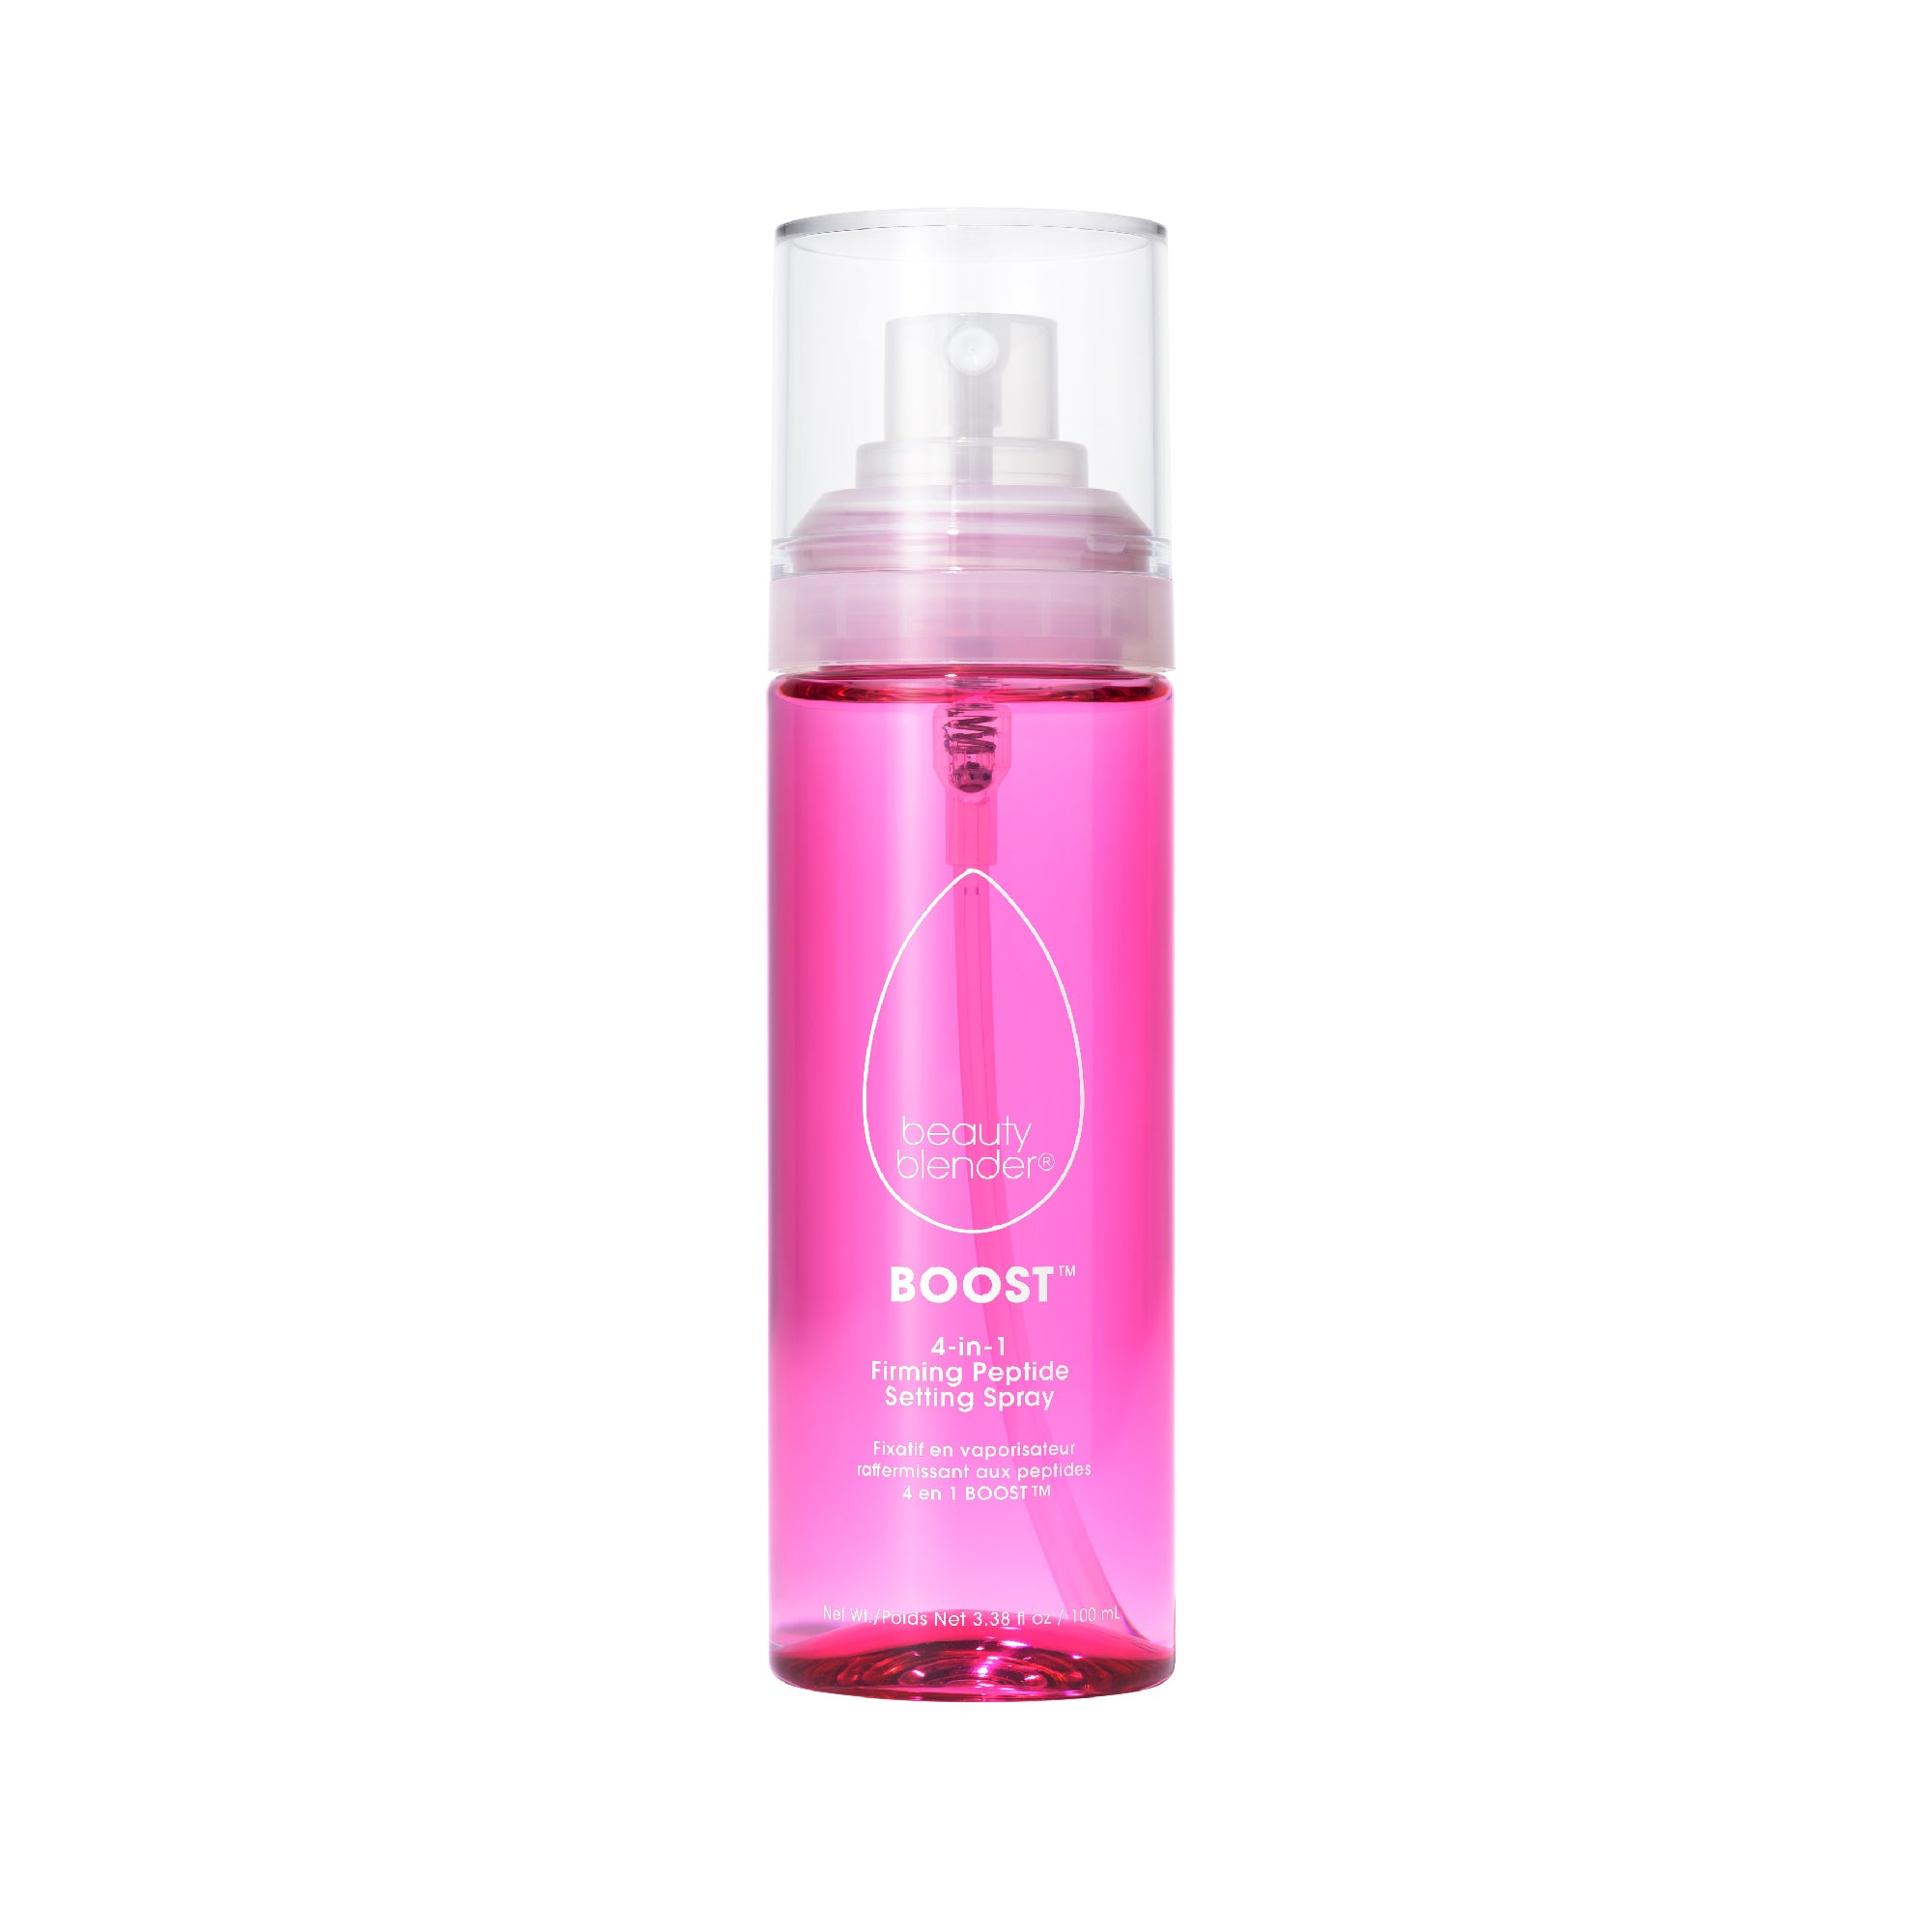 Boost™ 4-in-1 Firming Peptide 18-Hour Setting Spray